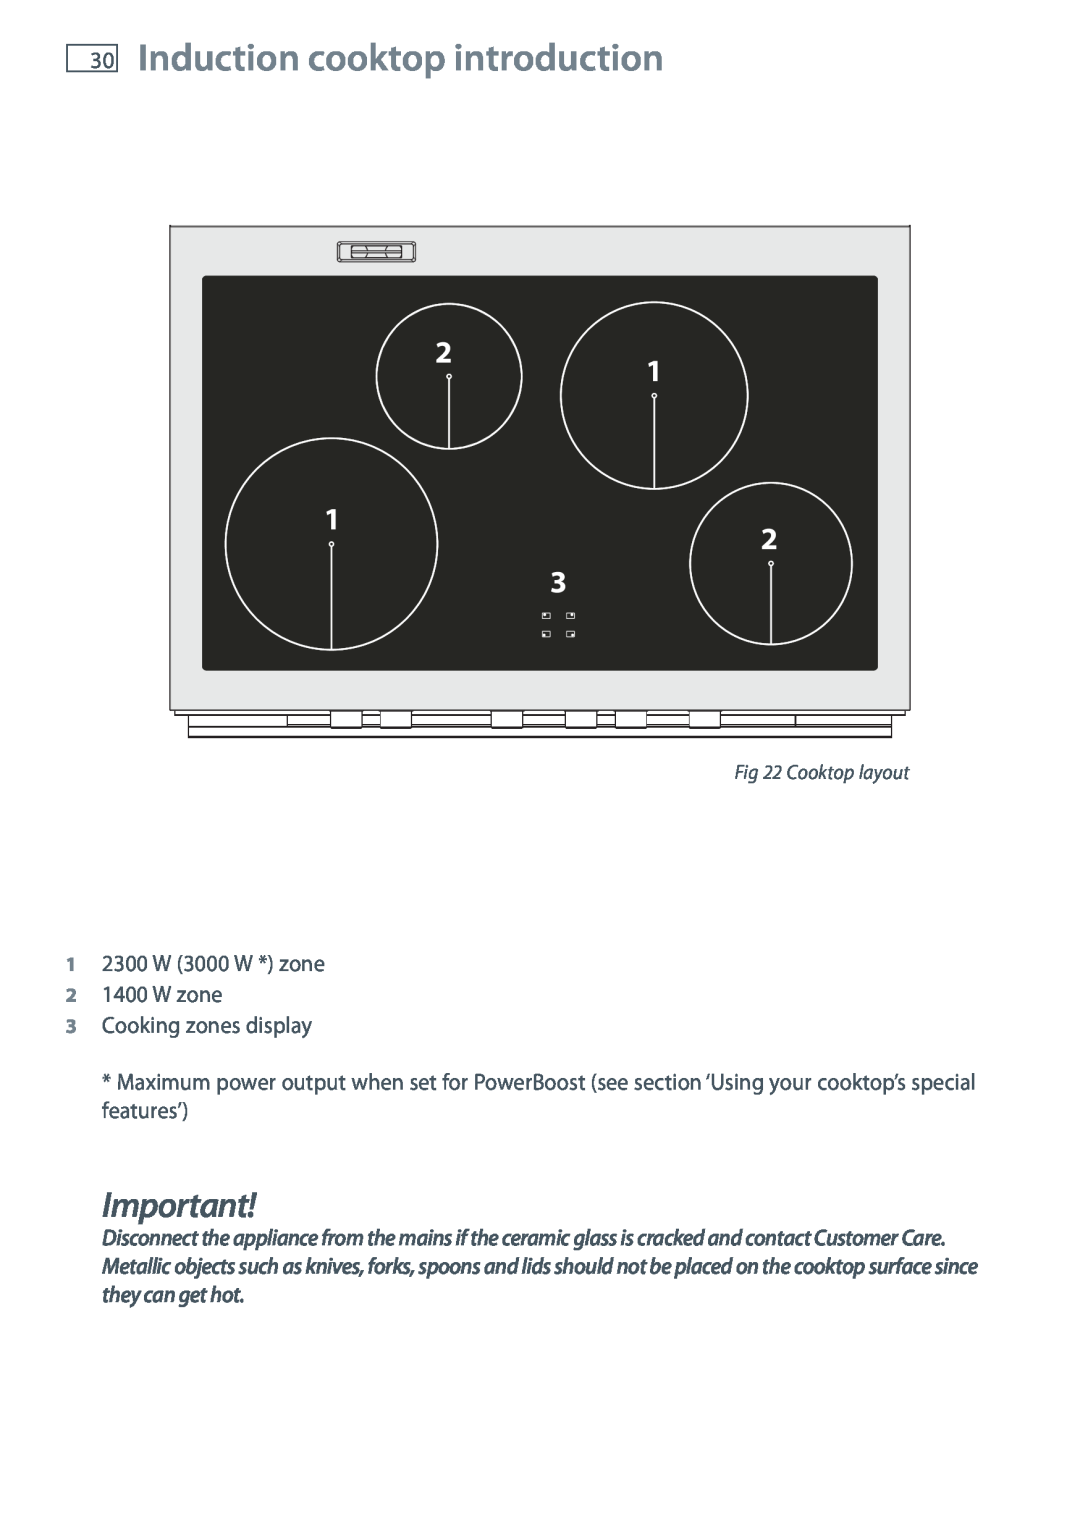 Fisher & Paykel OR90SBDSIX Induction cooktop introduction, 1 2300 W 3000 W * zone 2 1400 W zone 3 Cooking zones display 